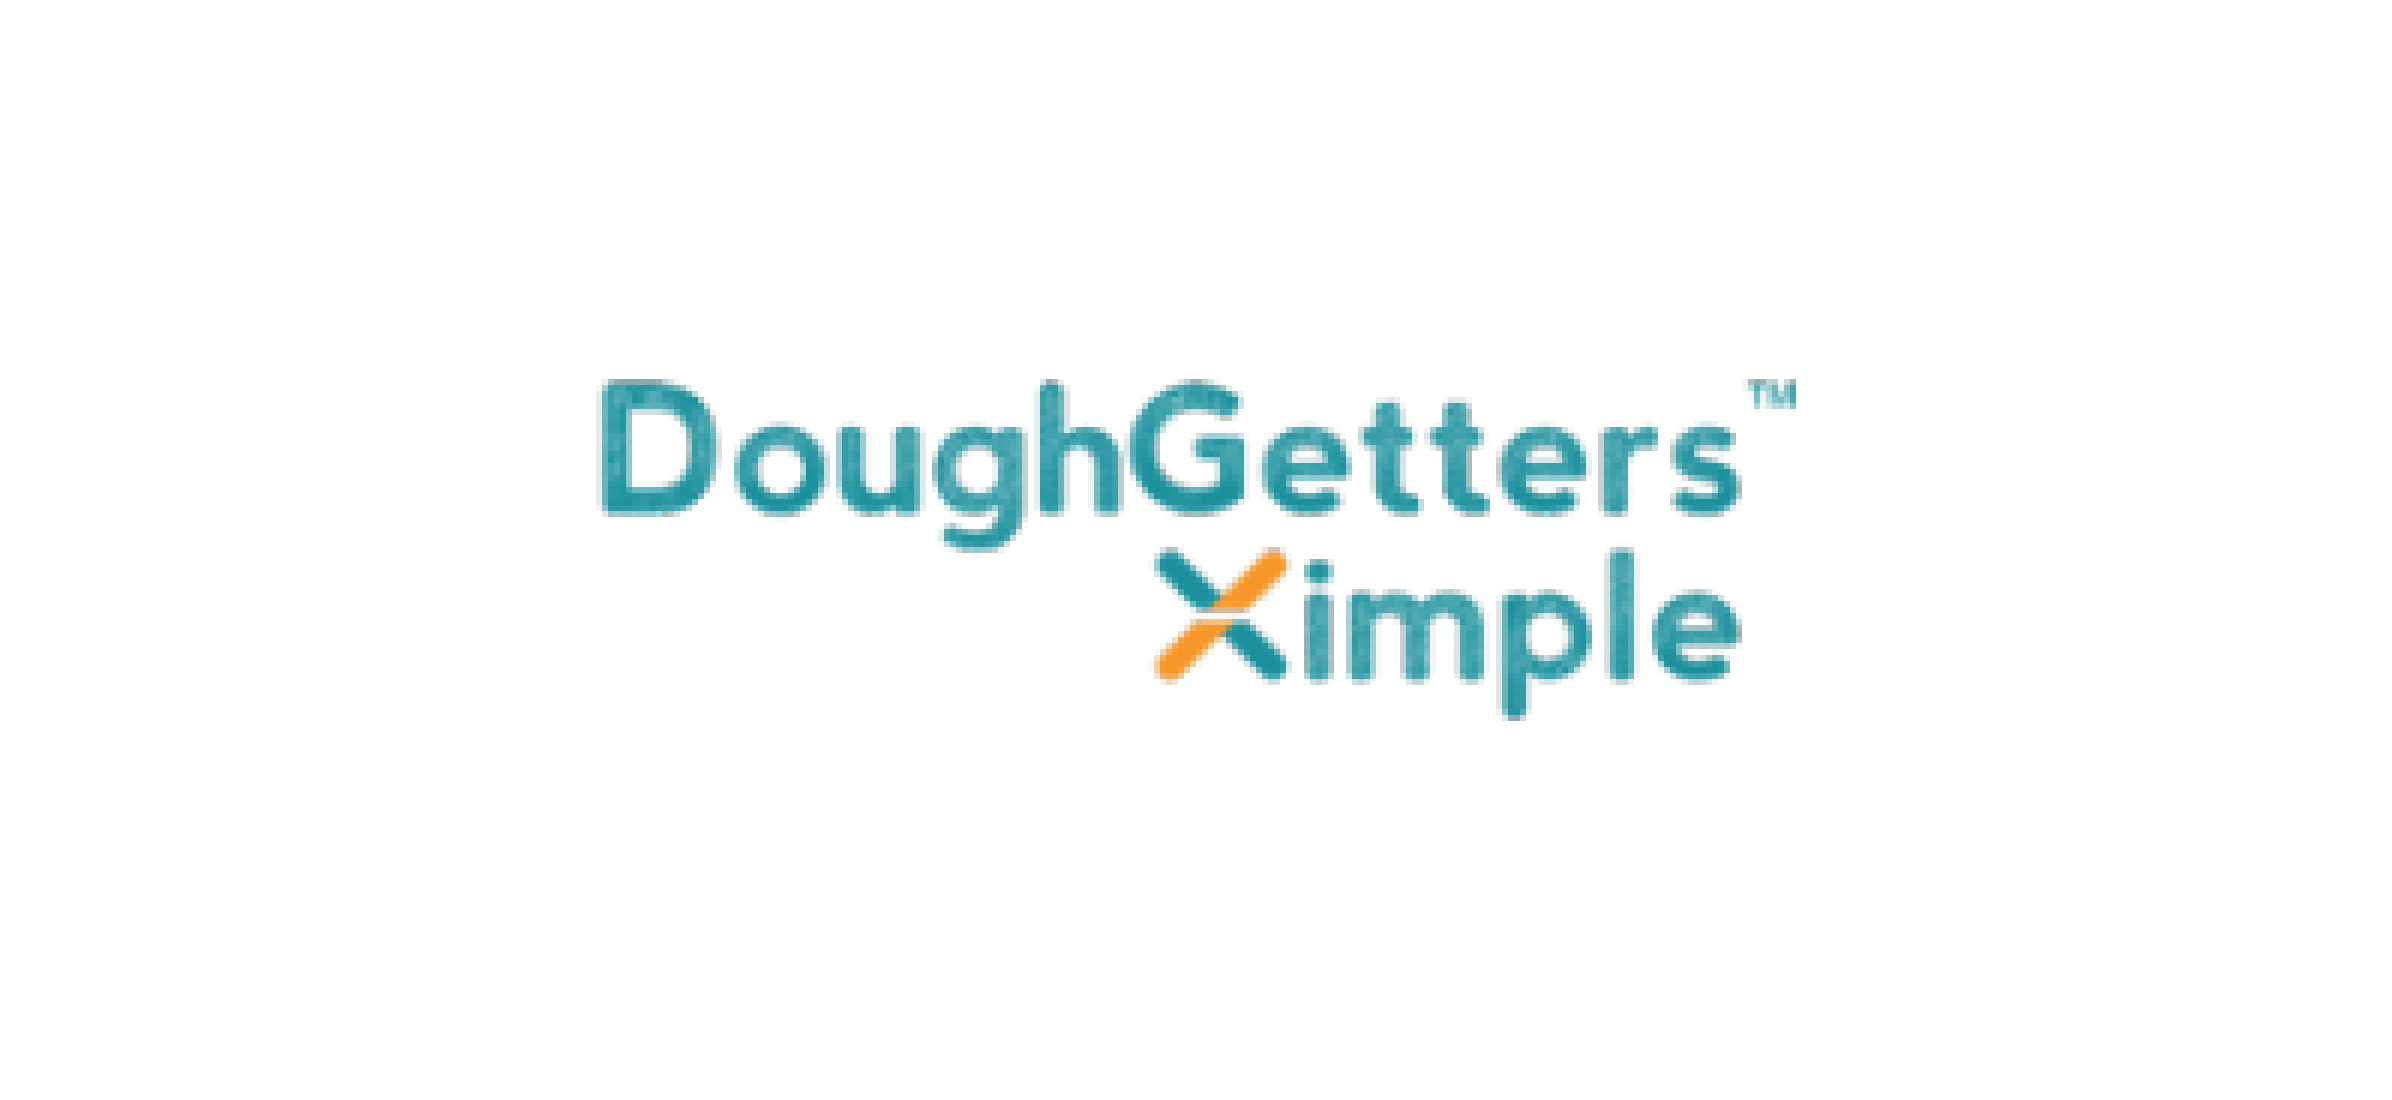 The Doughgetters Ximple logo